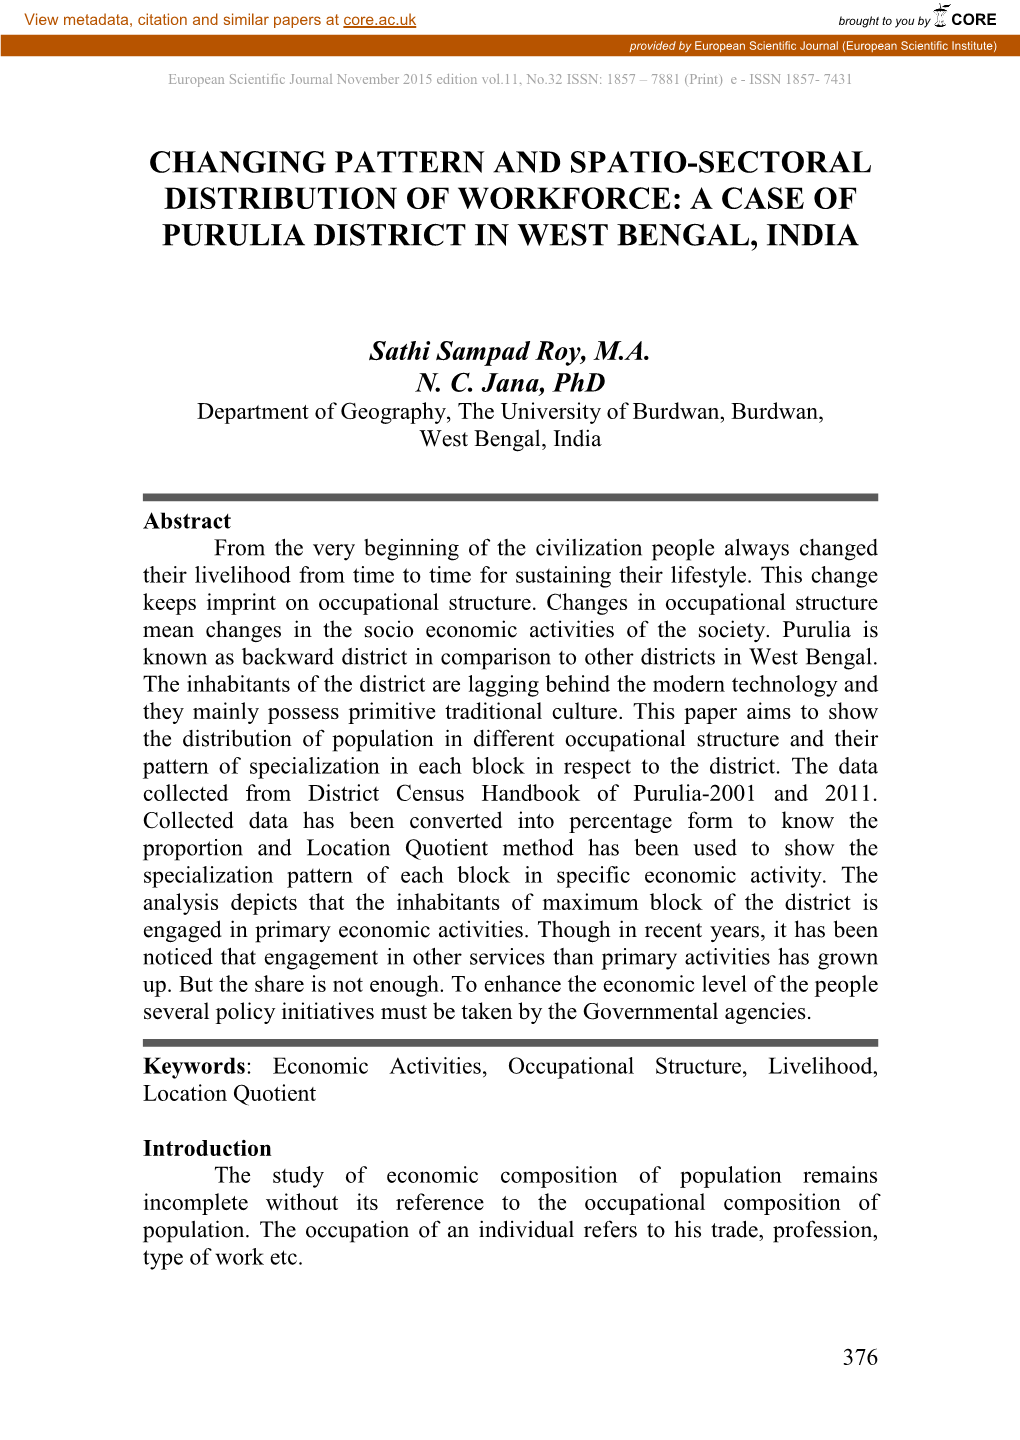 A Case of Purulia District in West Bengal, India